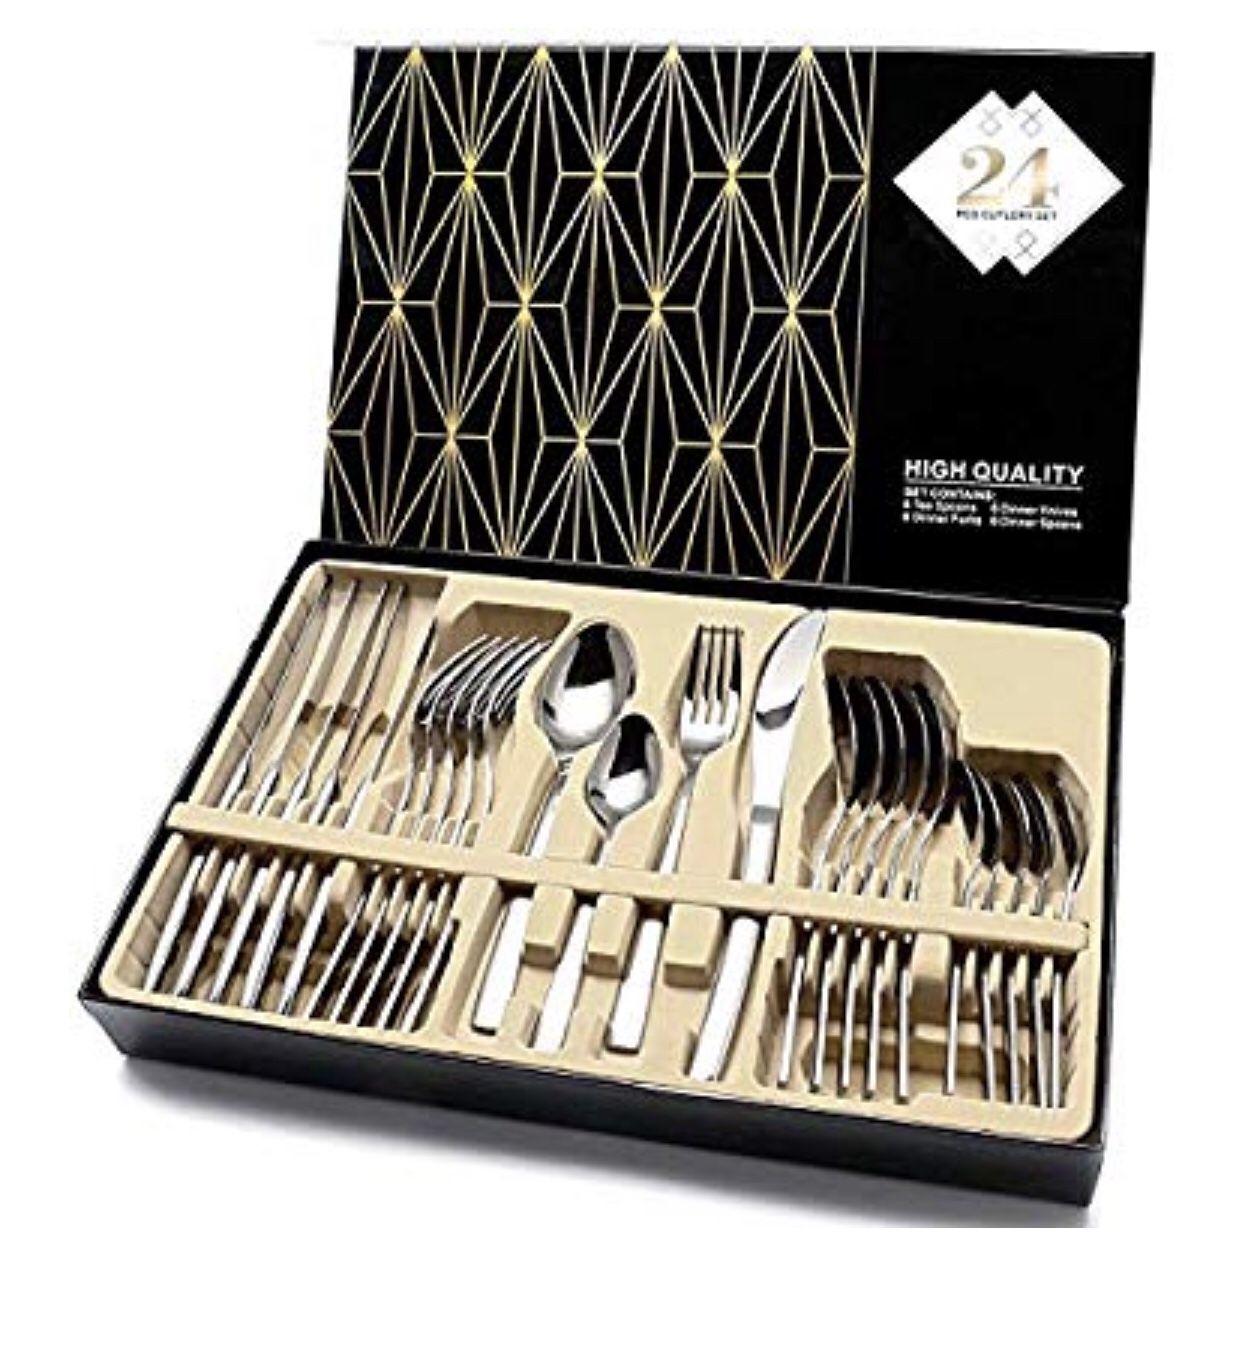 HOBO Silverware Set,24-Piece Stainless Steel Flatware Sets High-grade Mirror Polishing Cutlery Sets,Multipurpose Use for Home,Kitchen,Restaurant Tabl